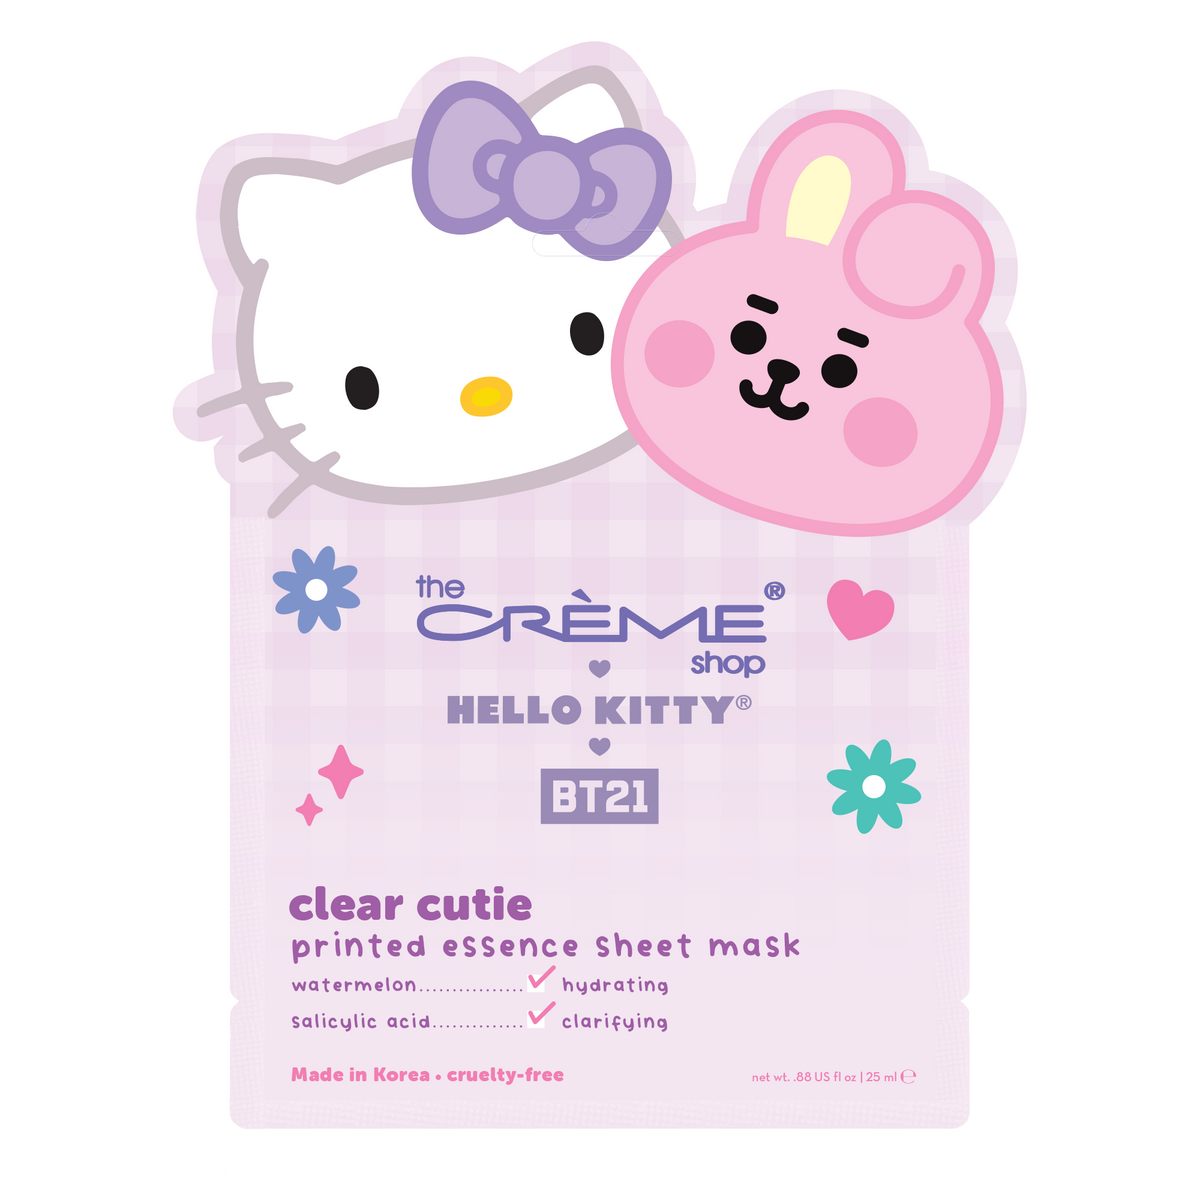 Hello Kitty &amp; BT21 Clear Cutie Printed Essence Sheet Mask Beauty The Crème Shop   